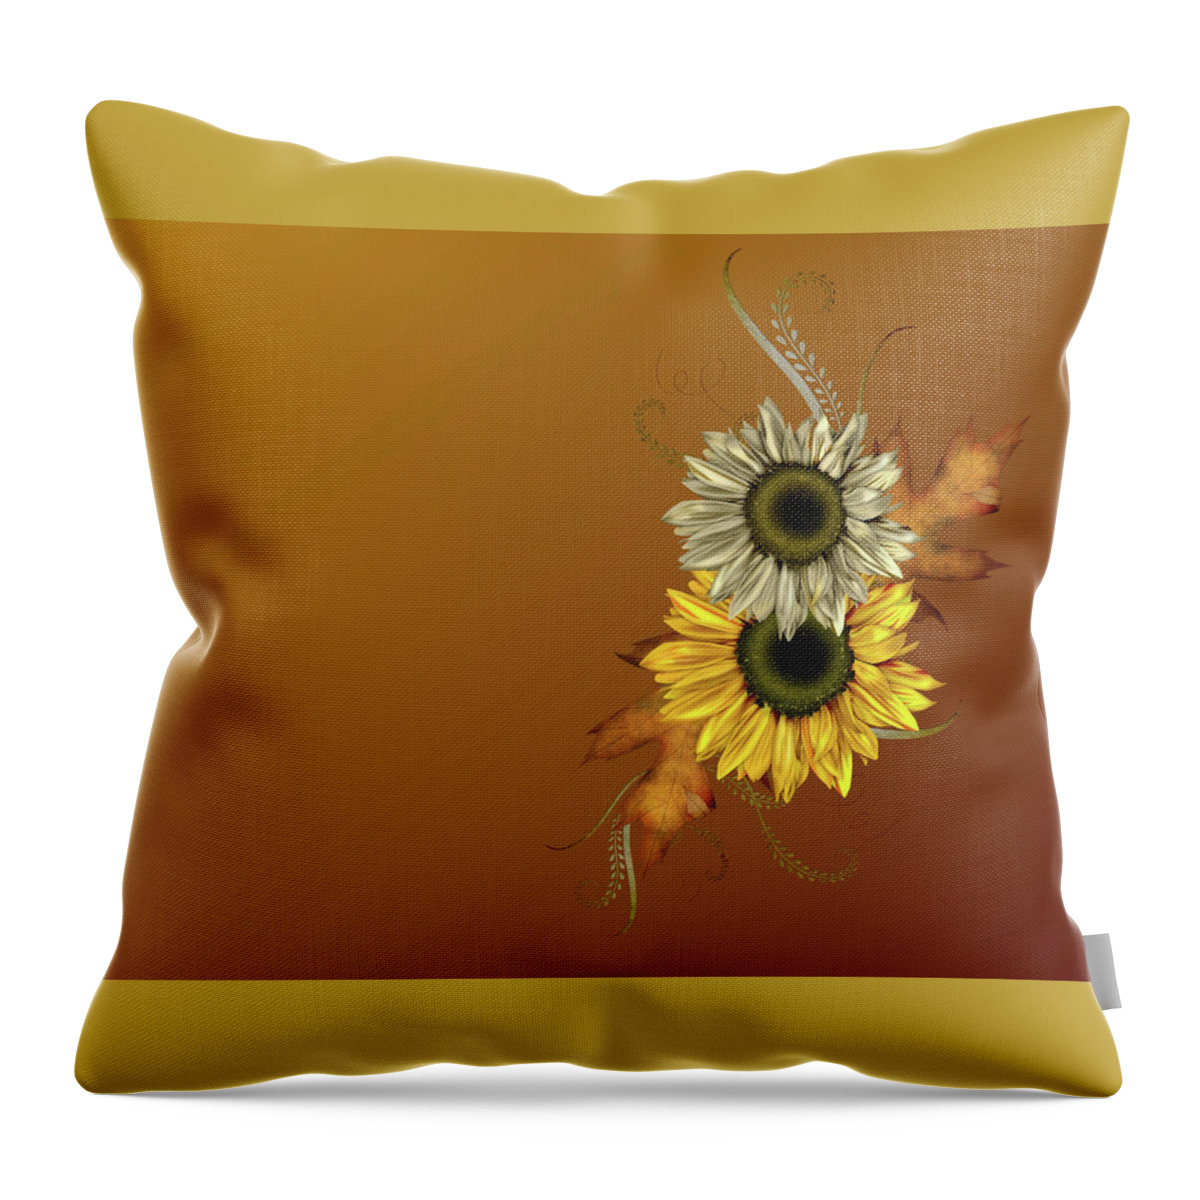 Elemental Throw Pillow featuring the digital art Elemental #1 by Super Lovely